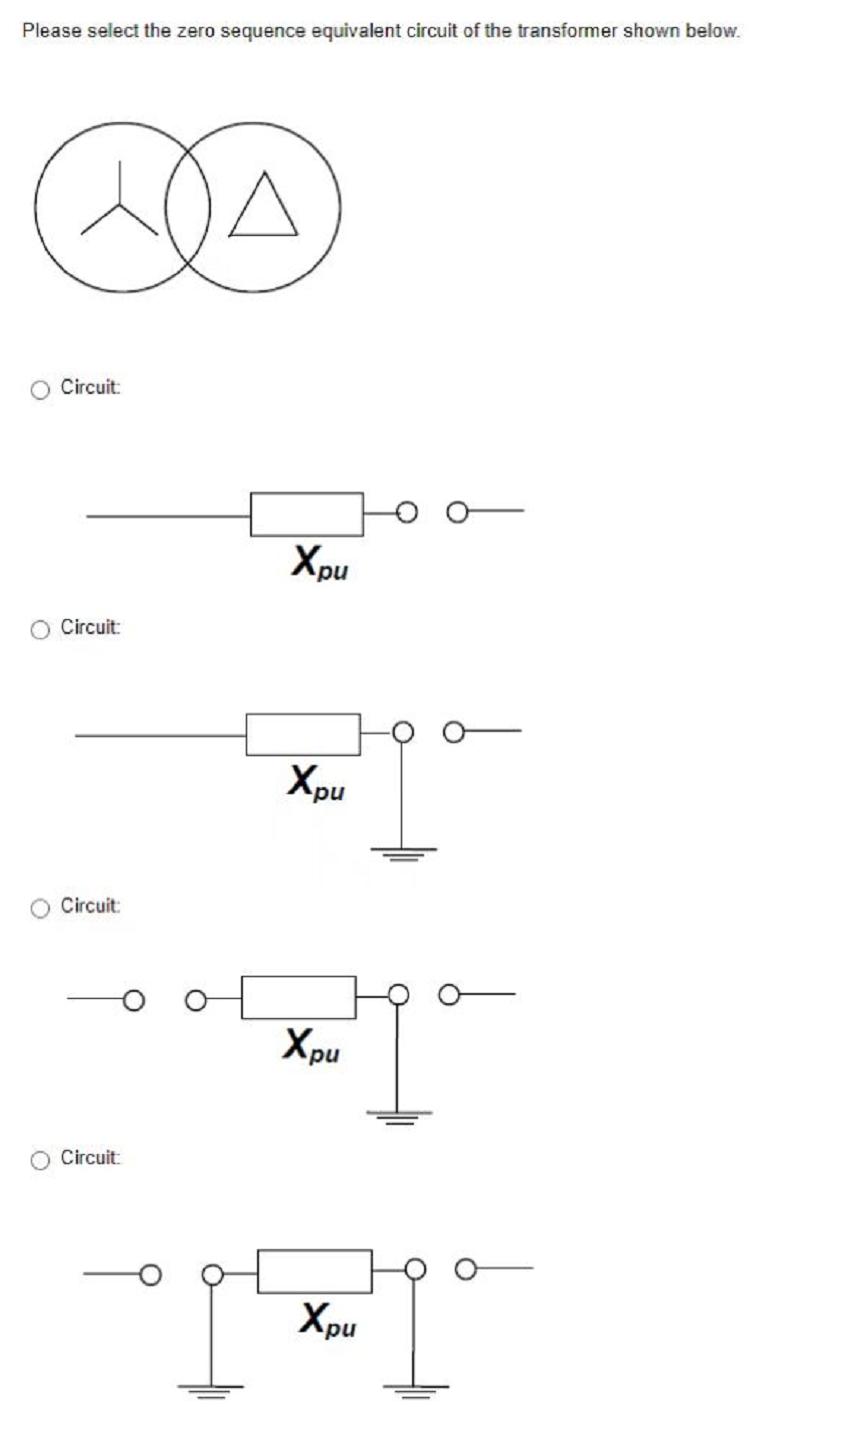 Please select the zero sequence equivalent circuit of the transformer shown below.
A
Circuit:
O Circuit:
Circuit:
Circuit:
Xpu
Xpu
Xpu
Igo
Xpu